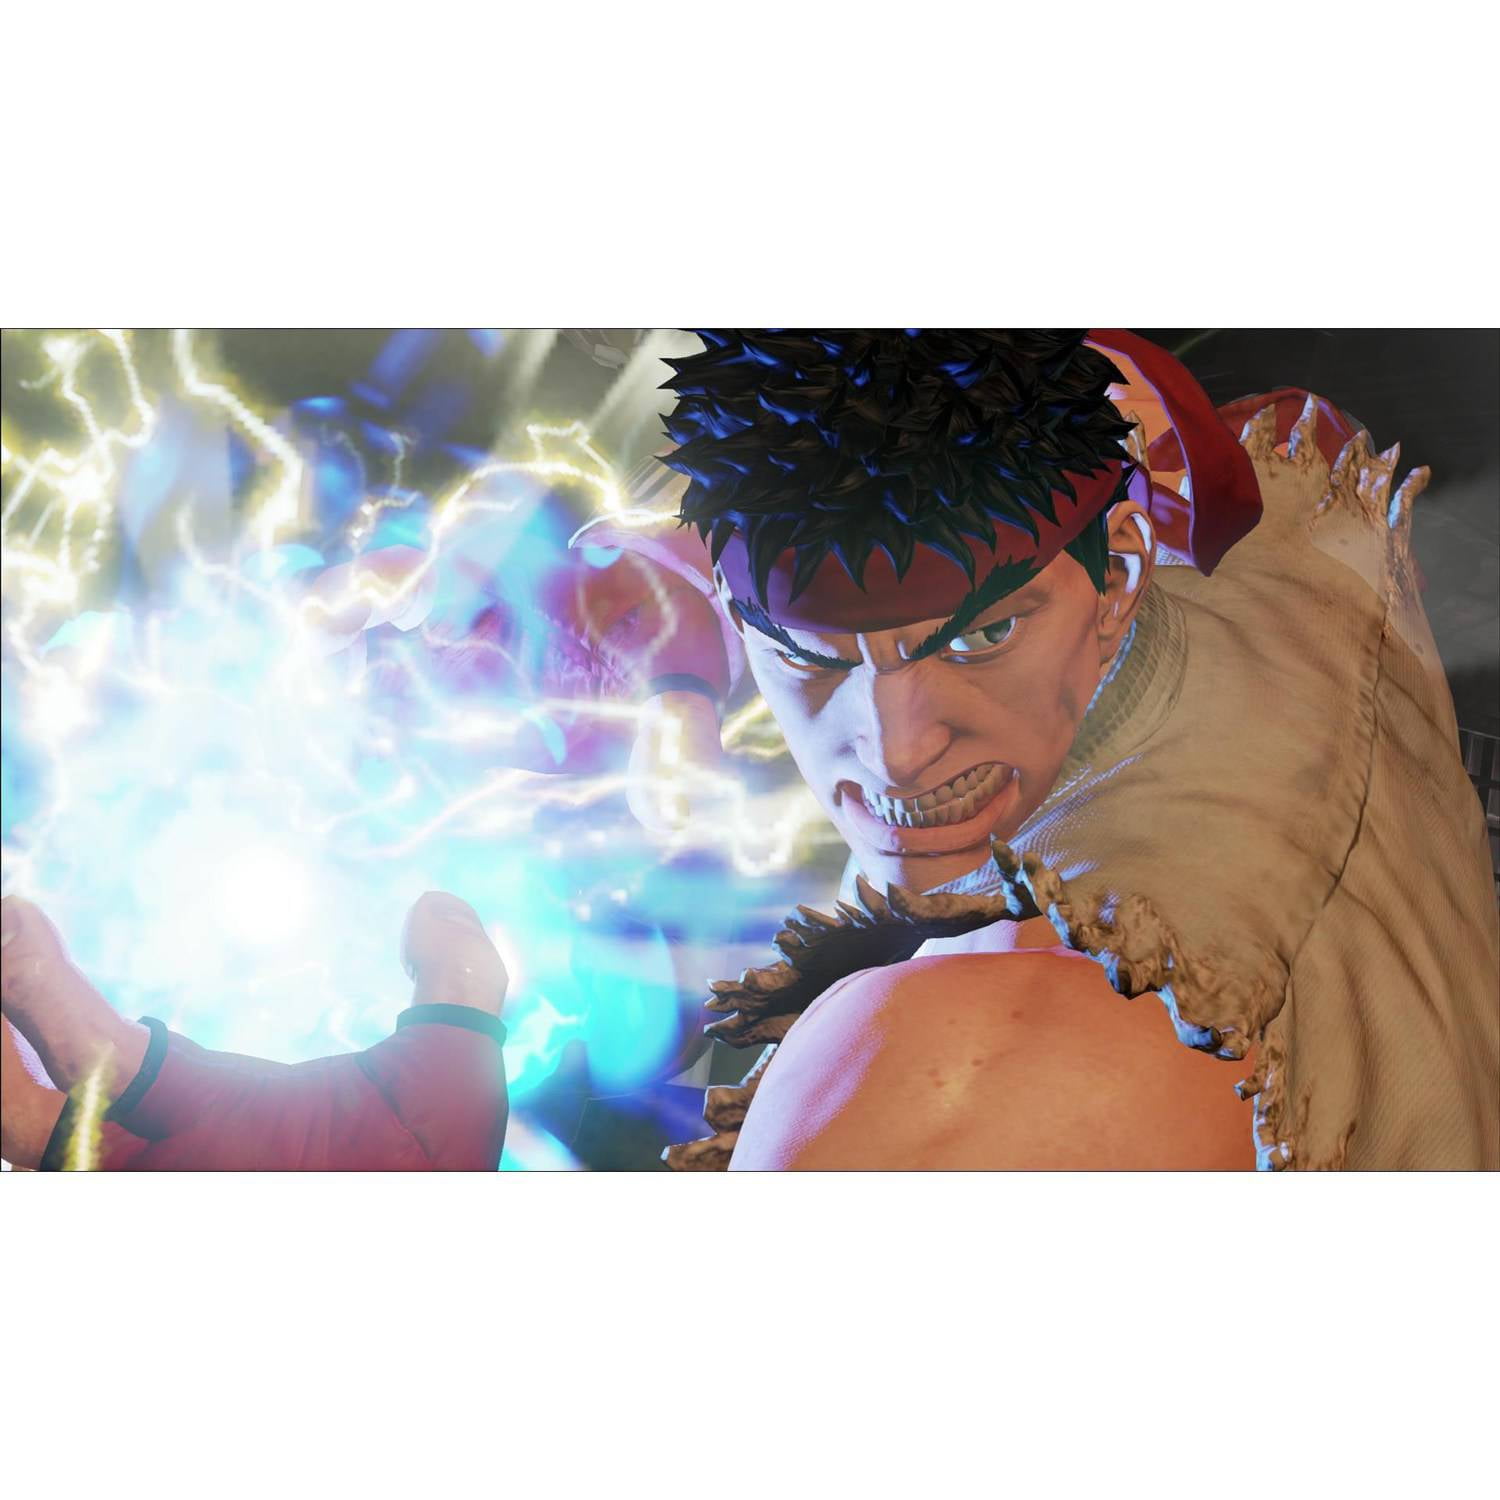  Street Fighter V - Collector's Edition - PlayStation 4 :  Everything Else